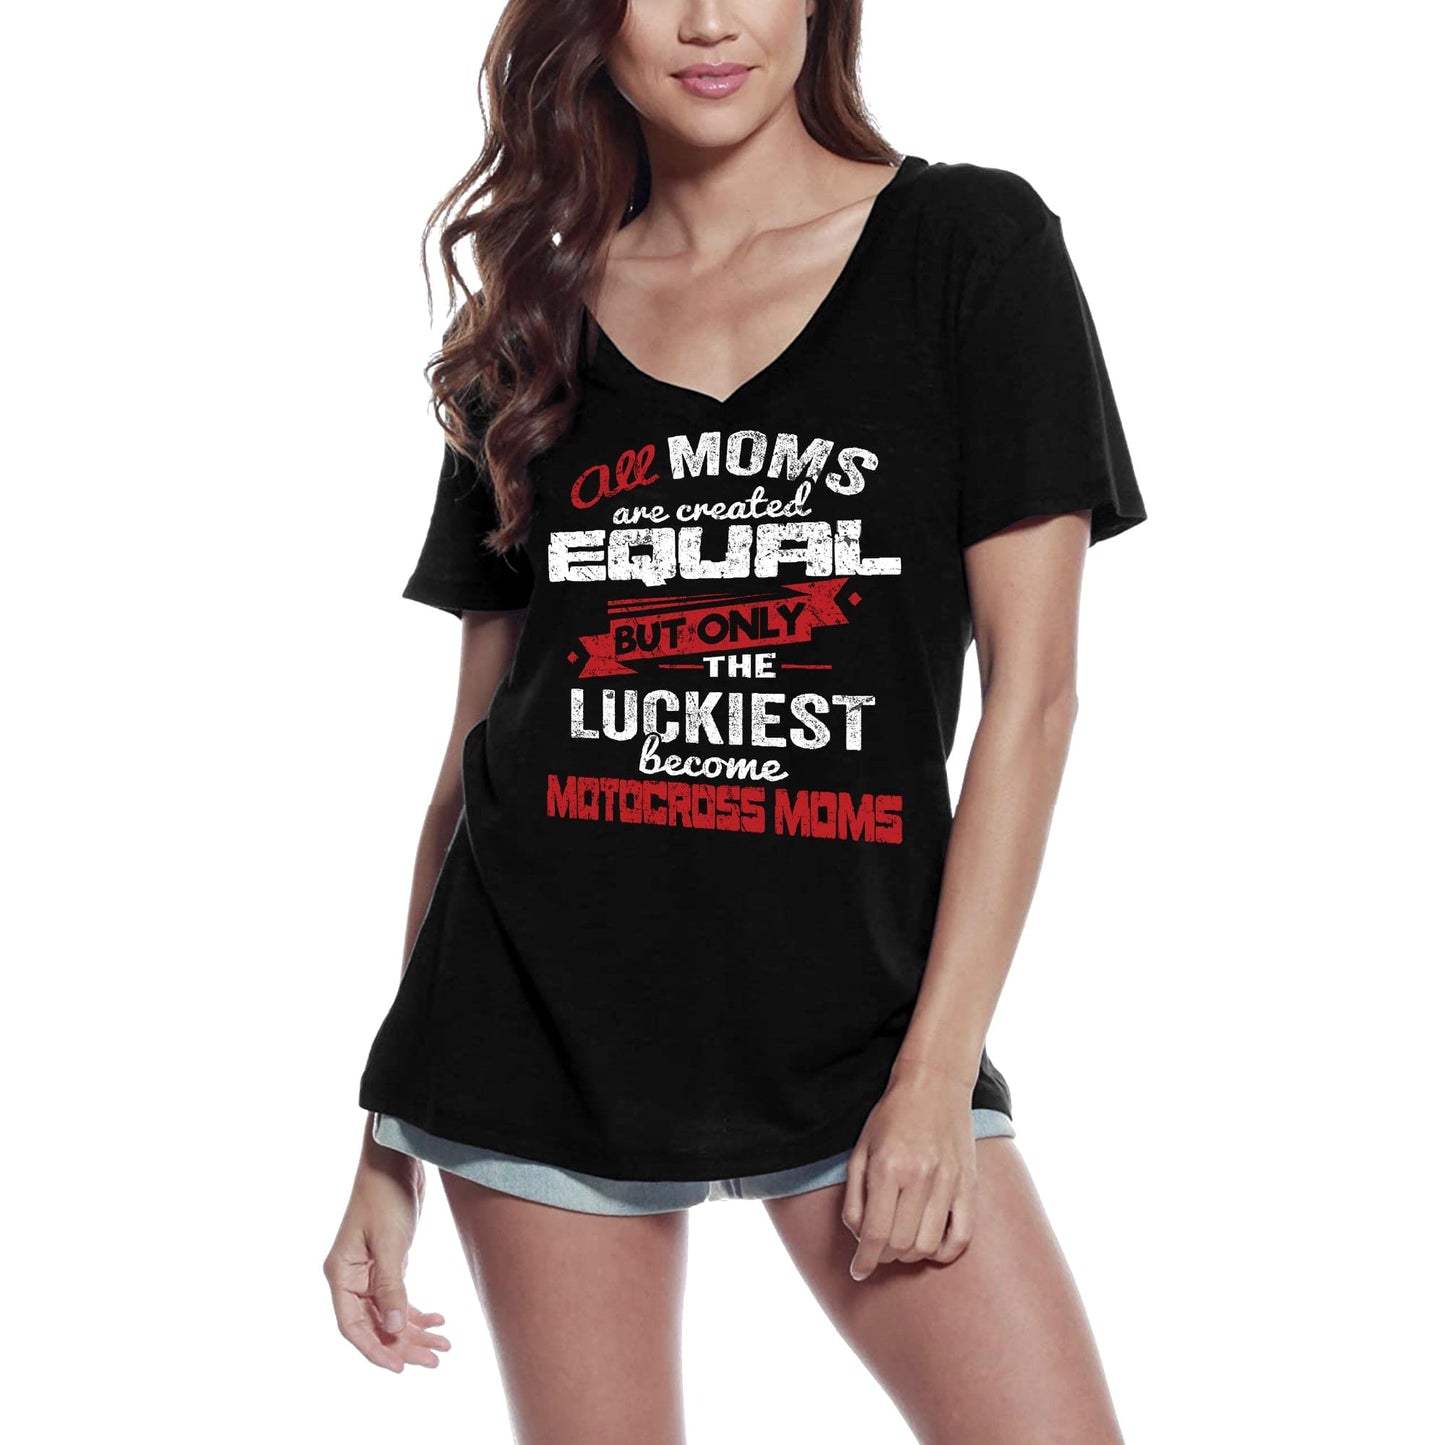 ULTRABASIC Women's T-Shirt All Mom's are Created Equal But Only the Luckiest Become Motocross Moms